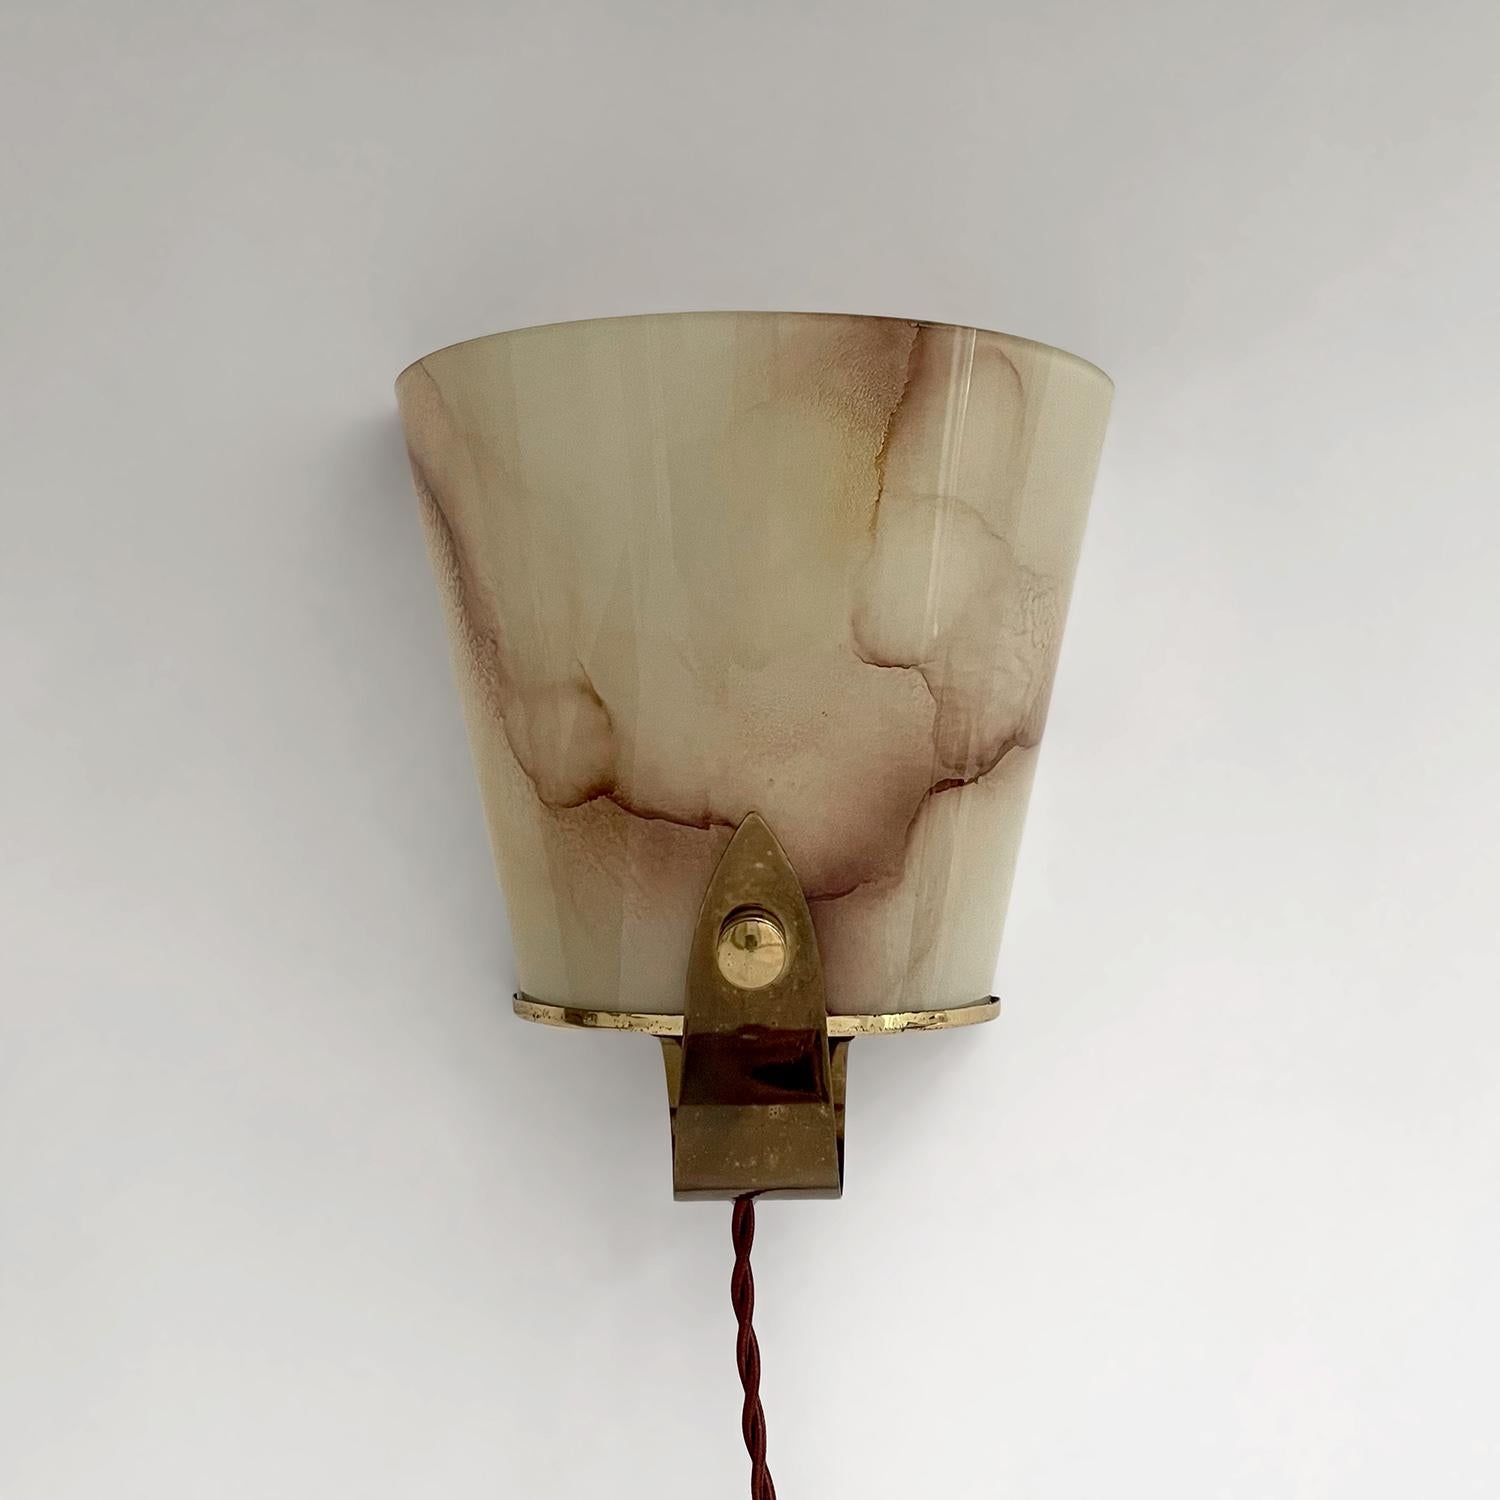 French marbled glass & brass sconce
France, 1940’s
Delicate semicircular marbled glass shade rests within sculpted aged brass frame
Light surface markings 
Illuminates light beautifully 
Patina from age and use
Newly rewired
Single socket candelabra